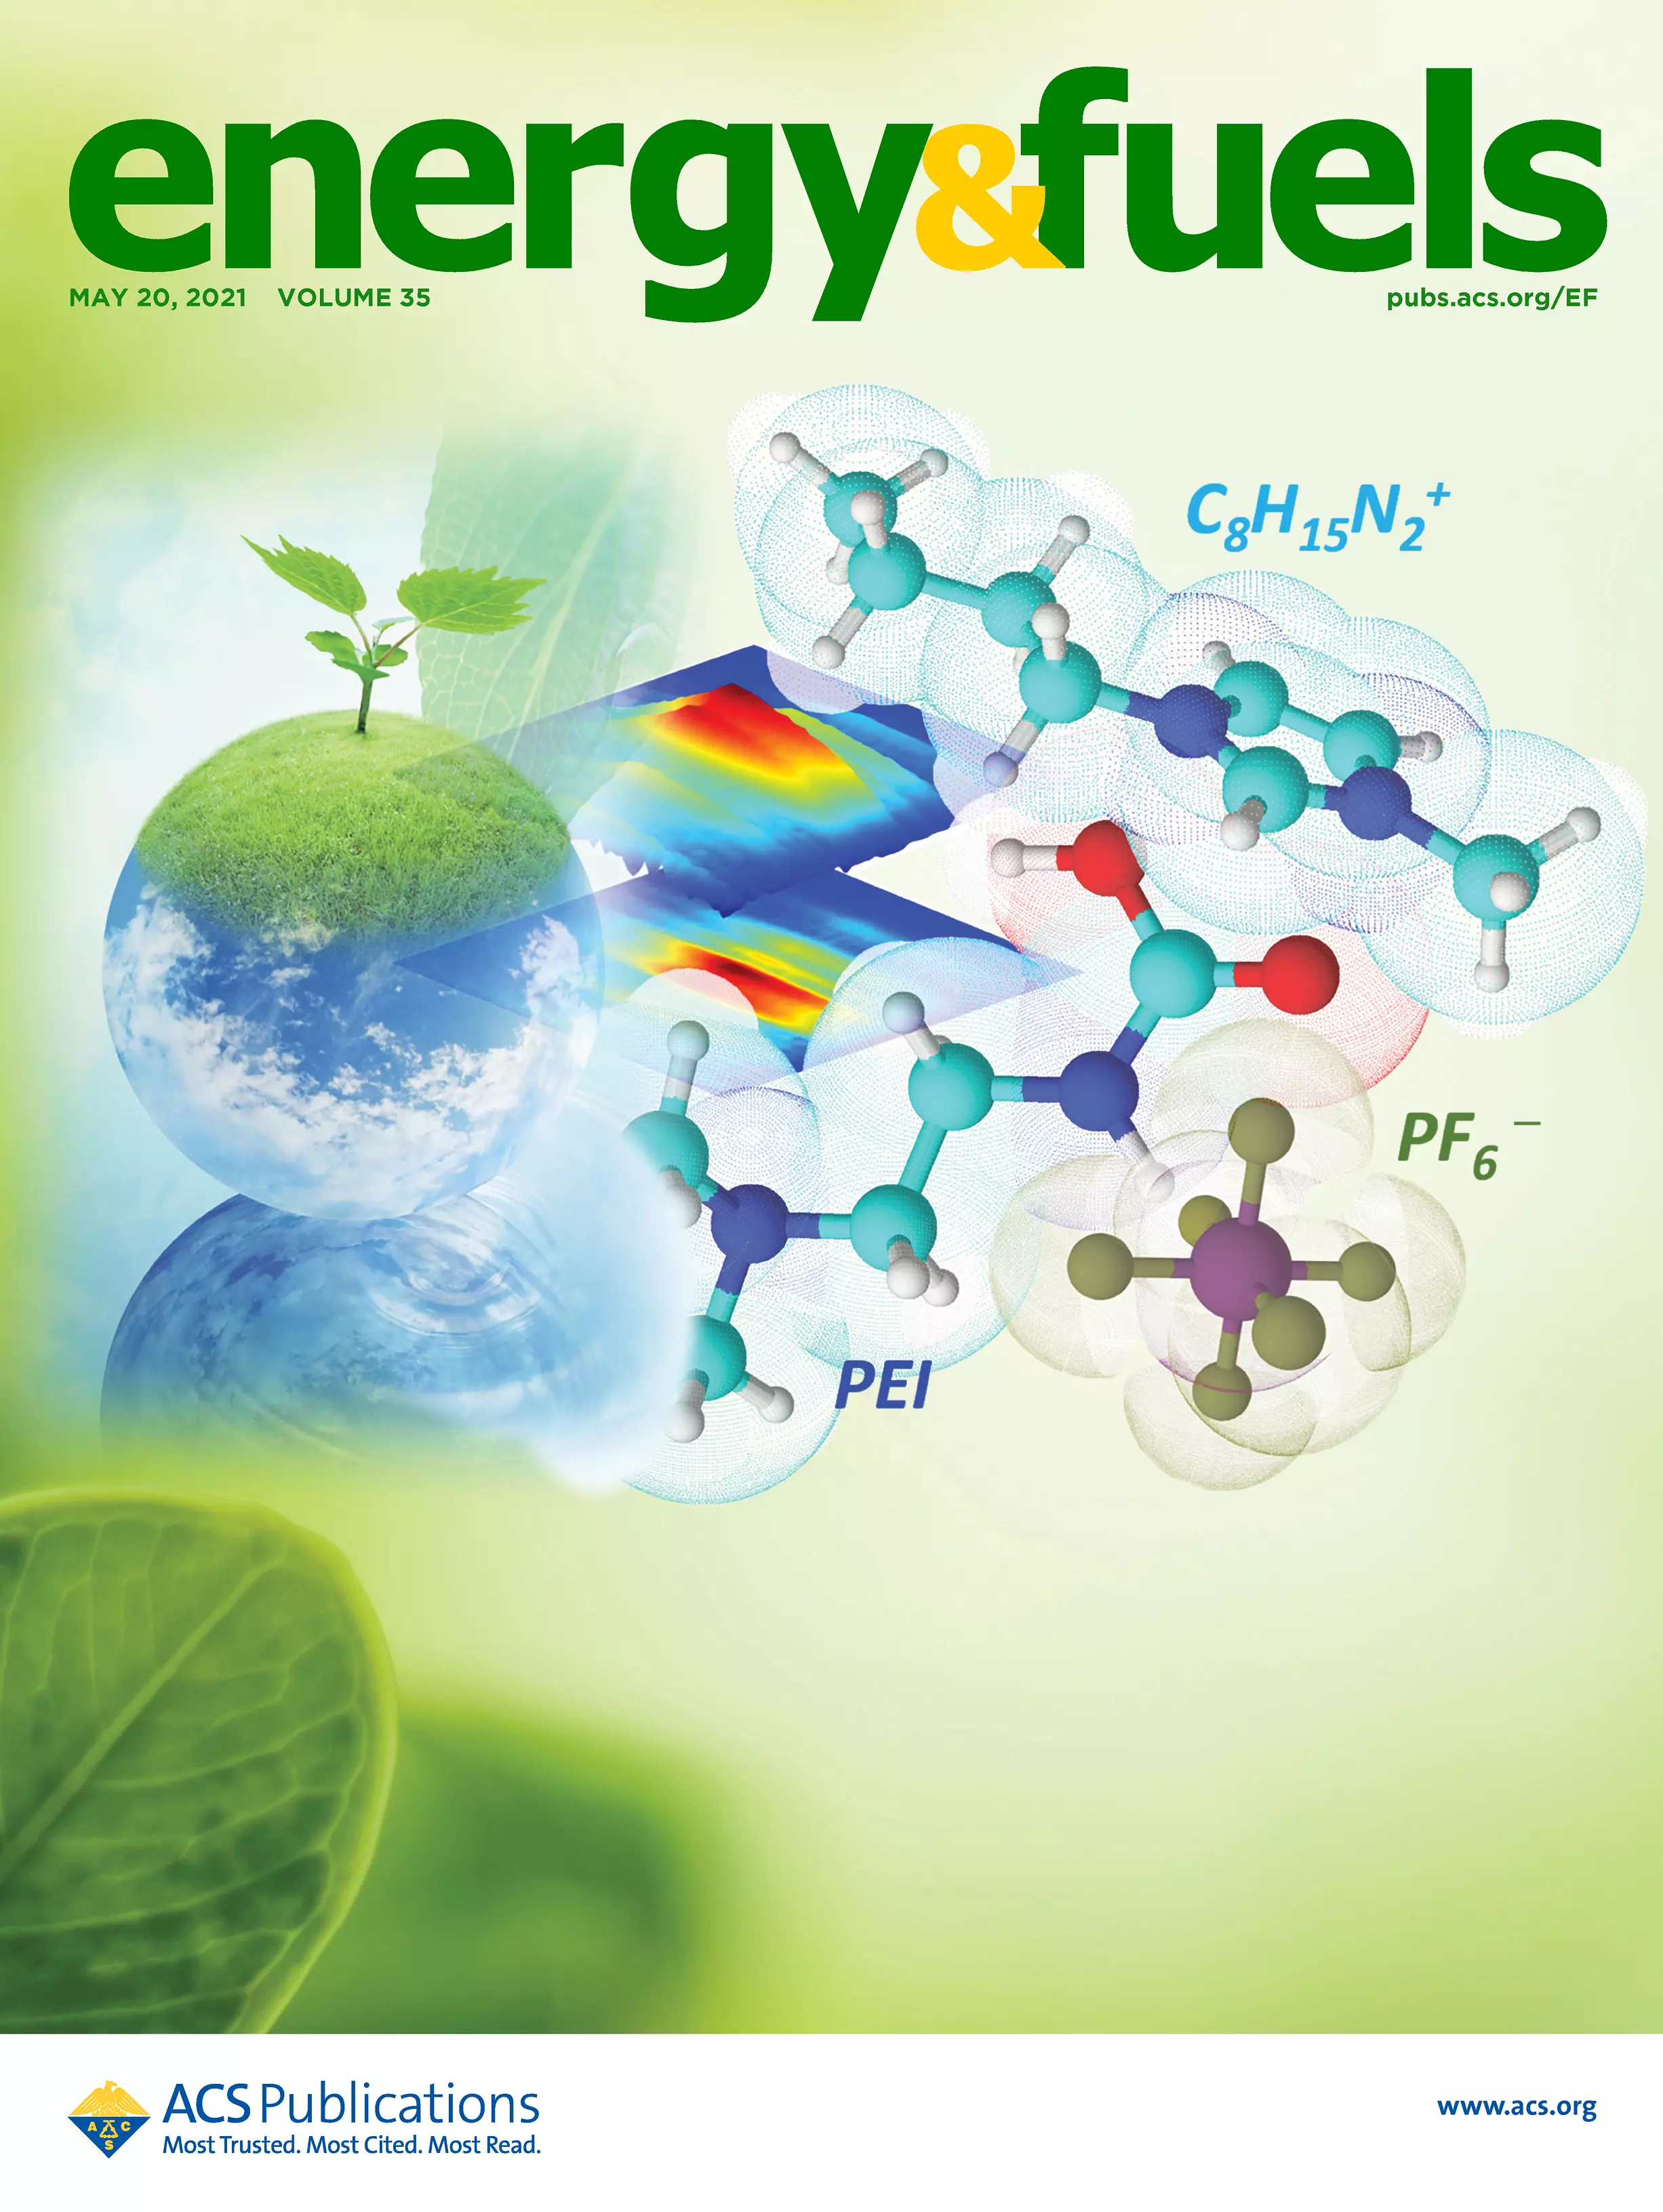 Cover of Energy & Fuels, Vol. 35, May 20, 2021, enlarged view